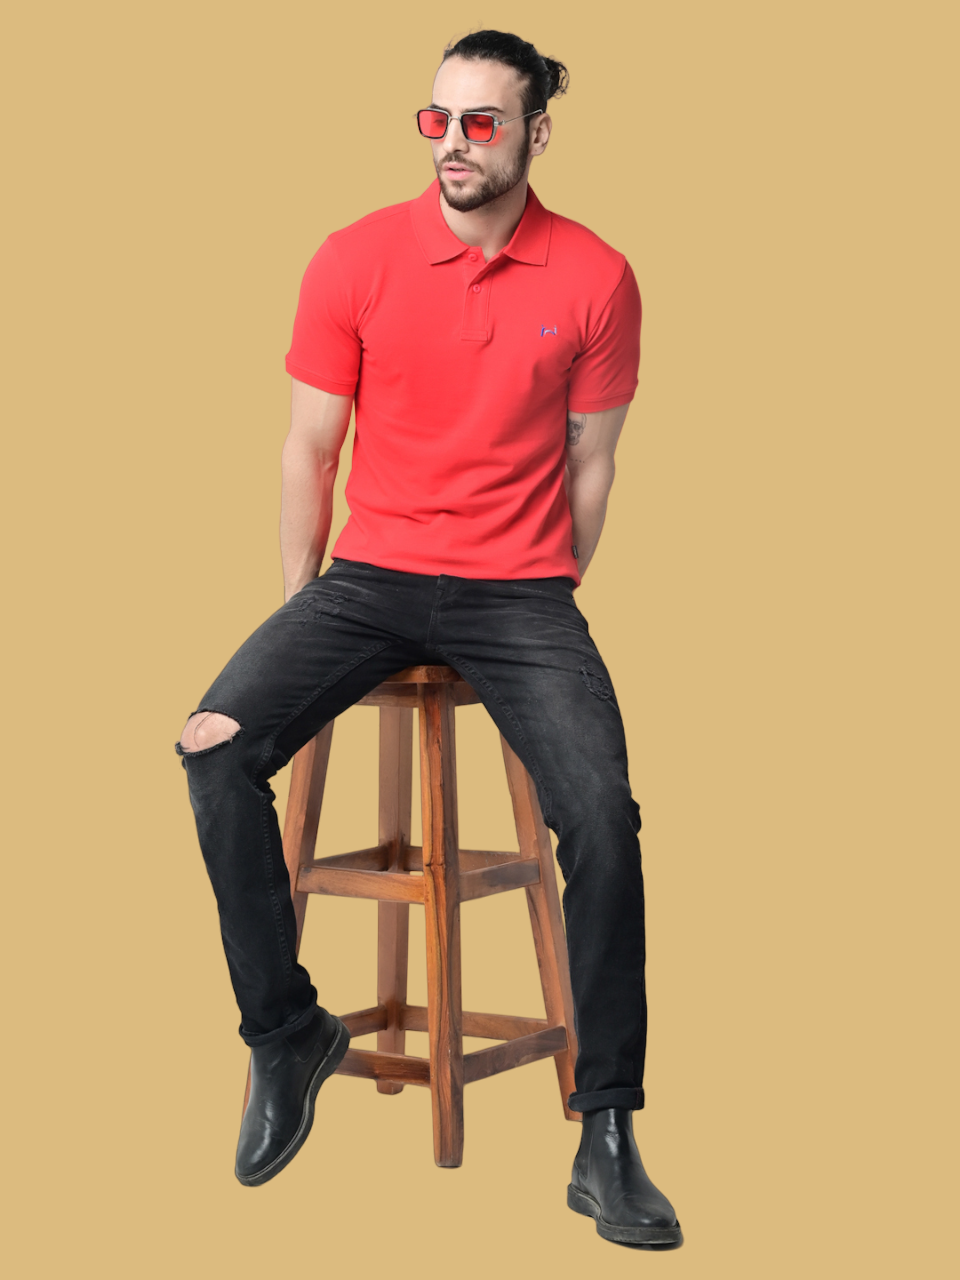 Flawless Men Red Organic Polo T-Shirt Being Flawless